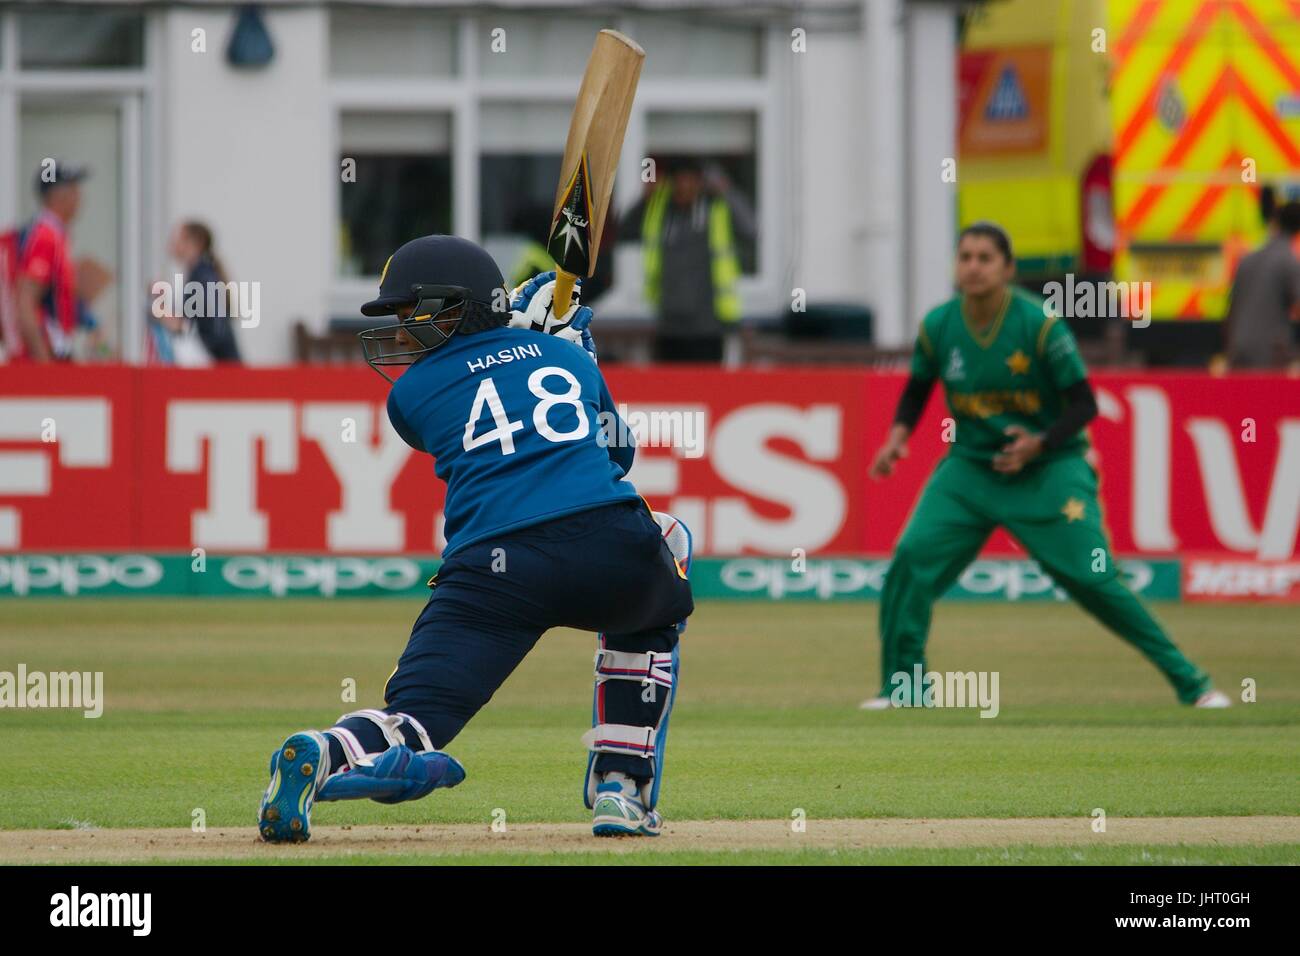 Leicester, England, 15th July 2017. Sri Lankan batter Hasini Perera watching the ball as she is caught by the Pakistan wicket keeper in the ICC Women’s World Cup 2017 at Grace Road, Leicester. Credit: Colin Edwards/Alamy Live News. Stock Photo